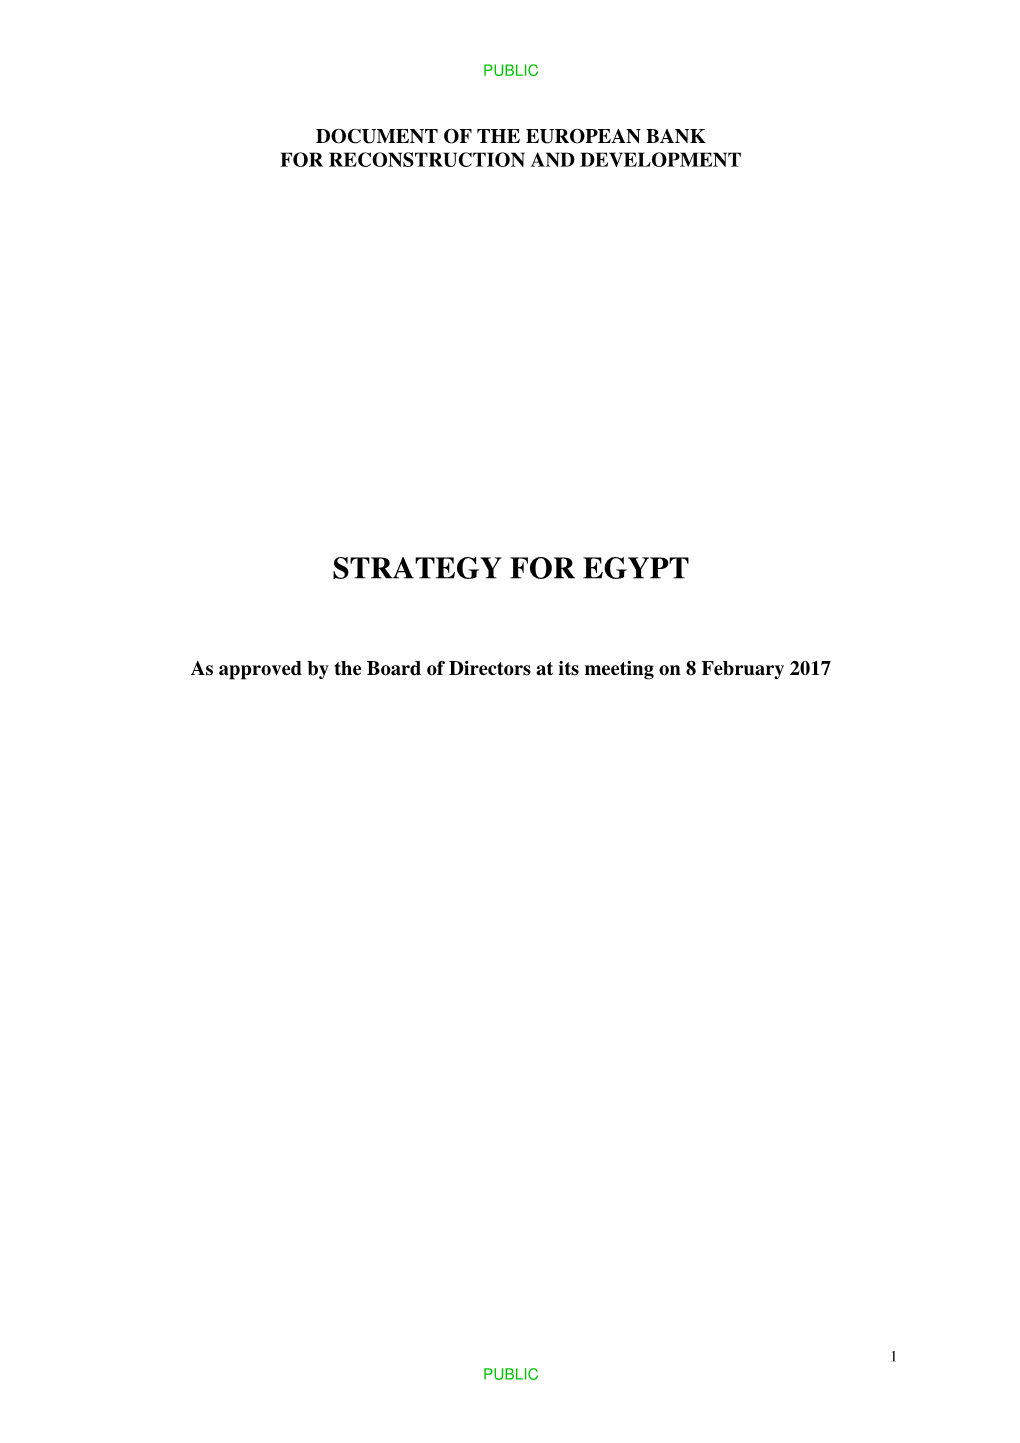 Strategy for Egypt